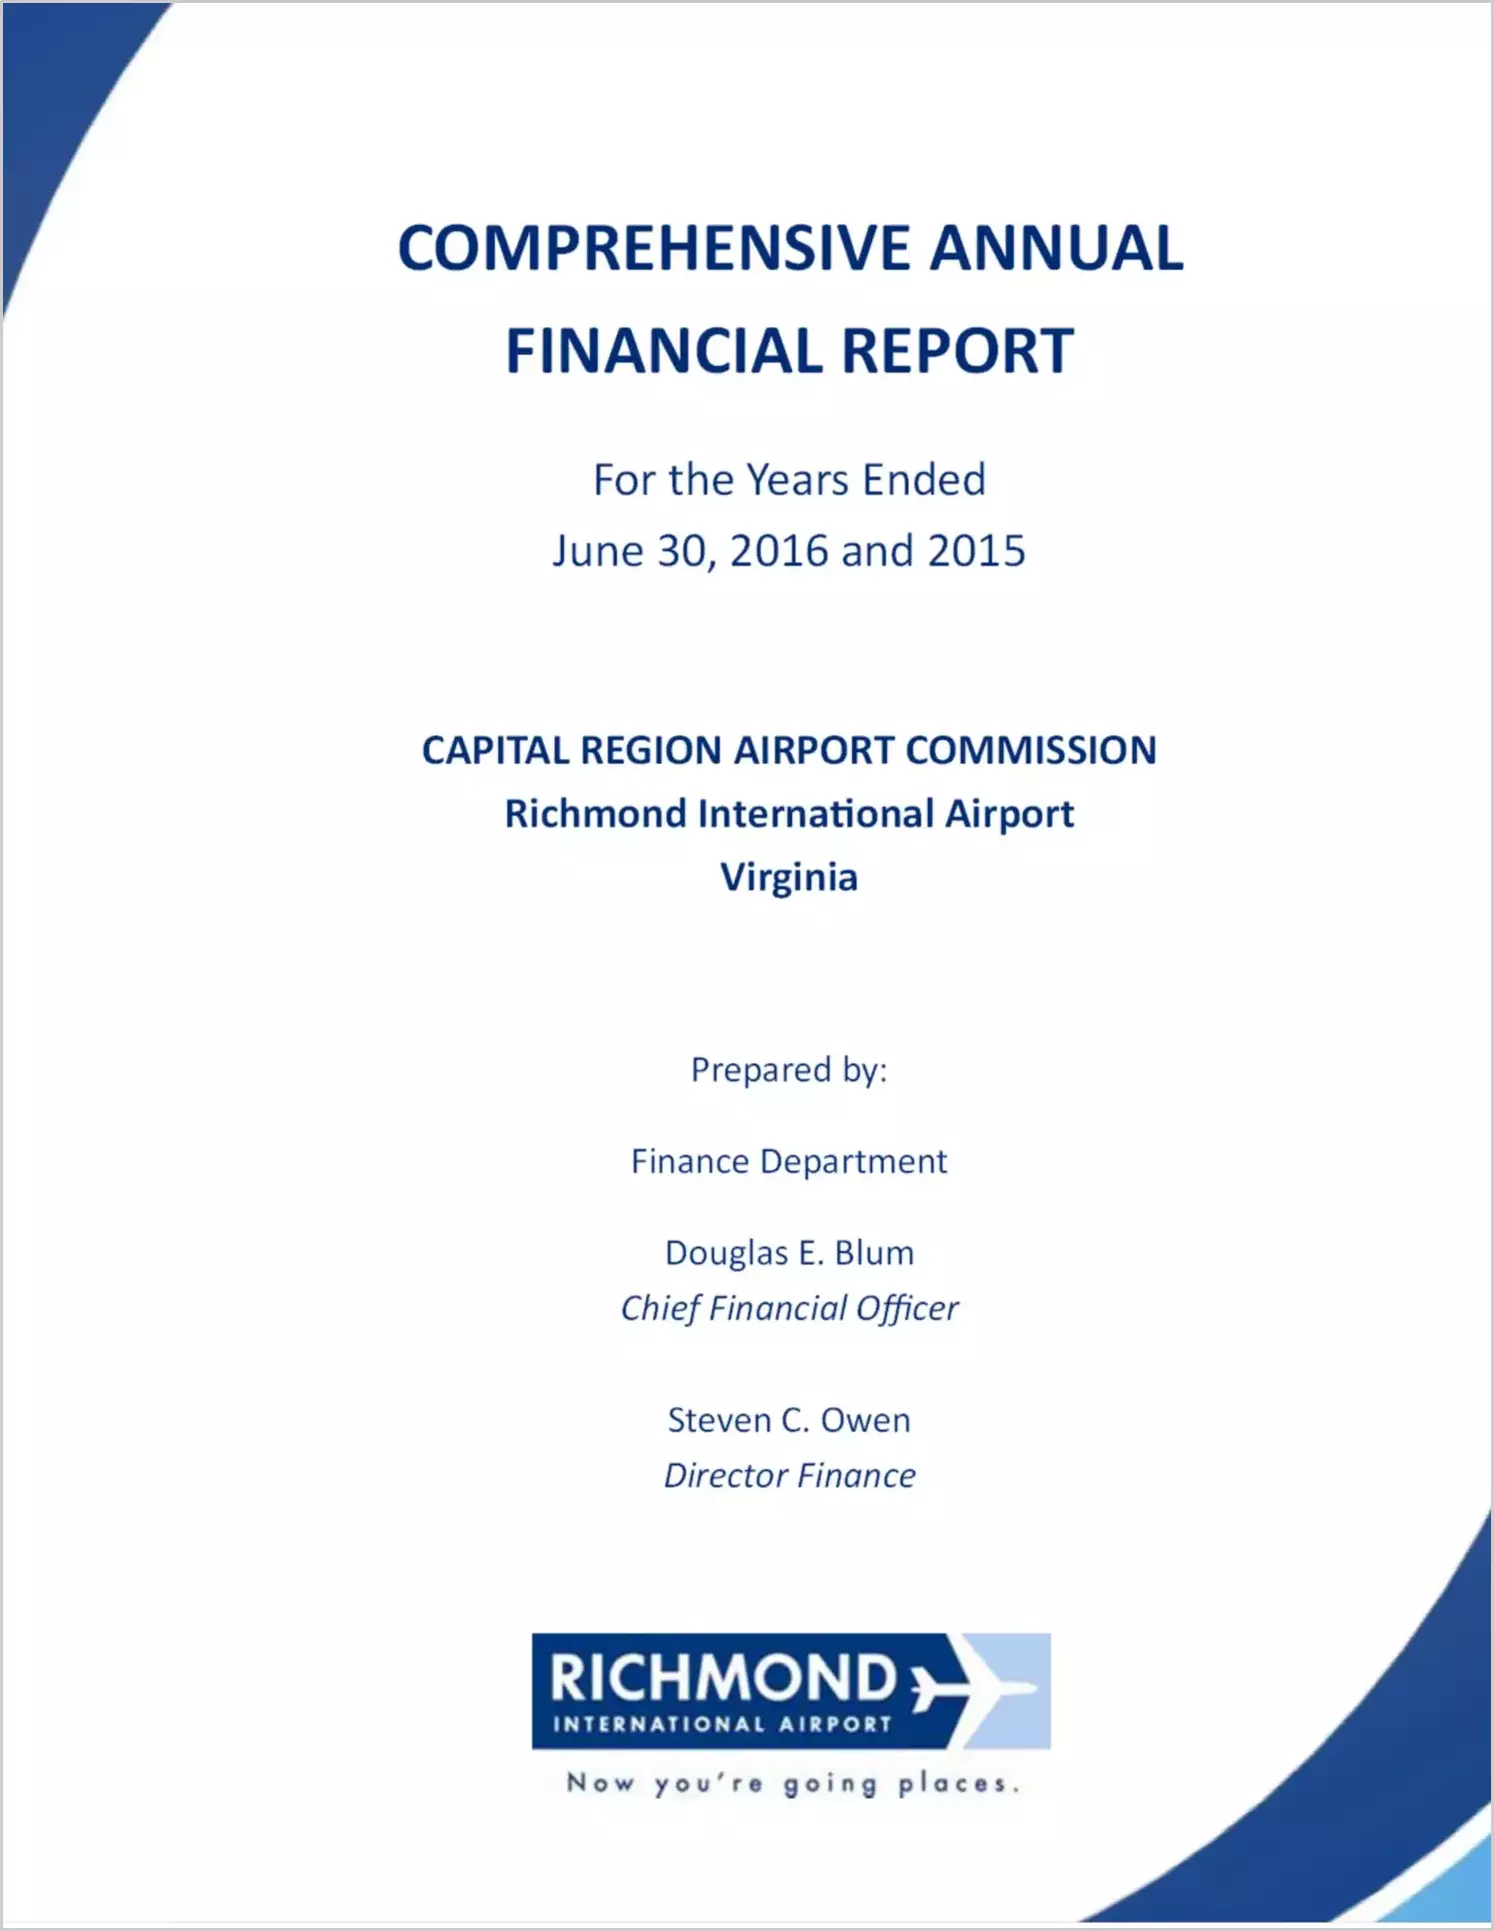 2016 ABC/Other Annual Financial Report  for Capital Region Airport Commission